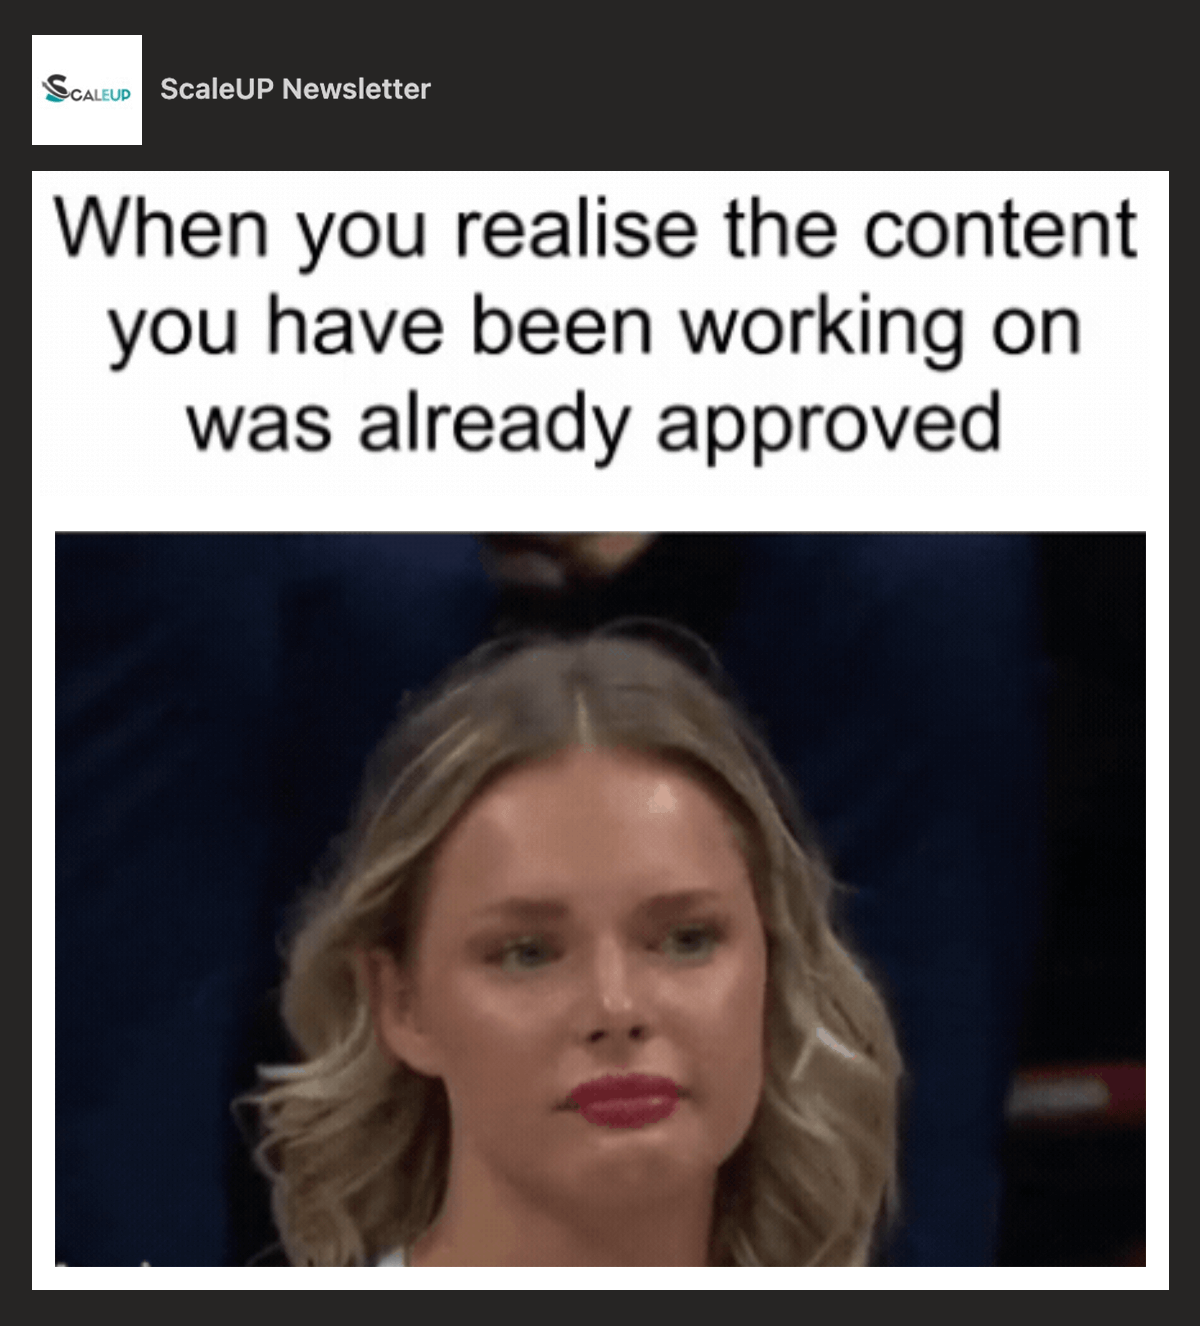 @ScaleUp Newsletter on LinkedIn: When you realise the content you have been working on was already approved. Image of a very sad person.